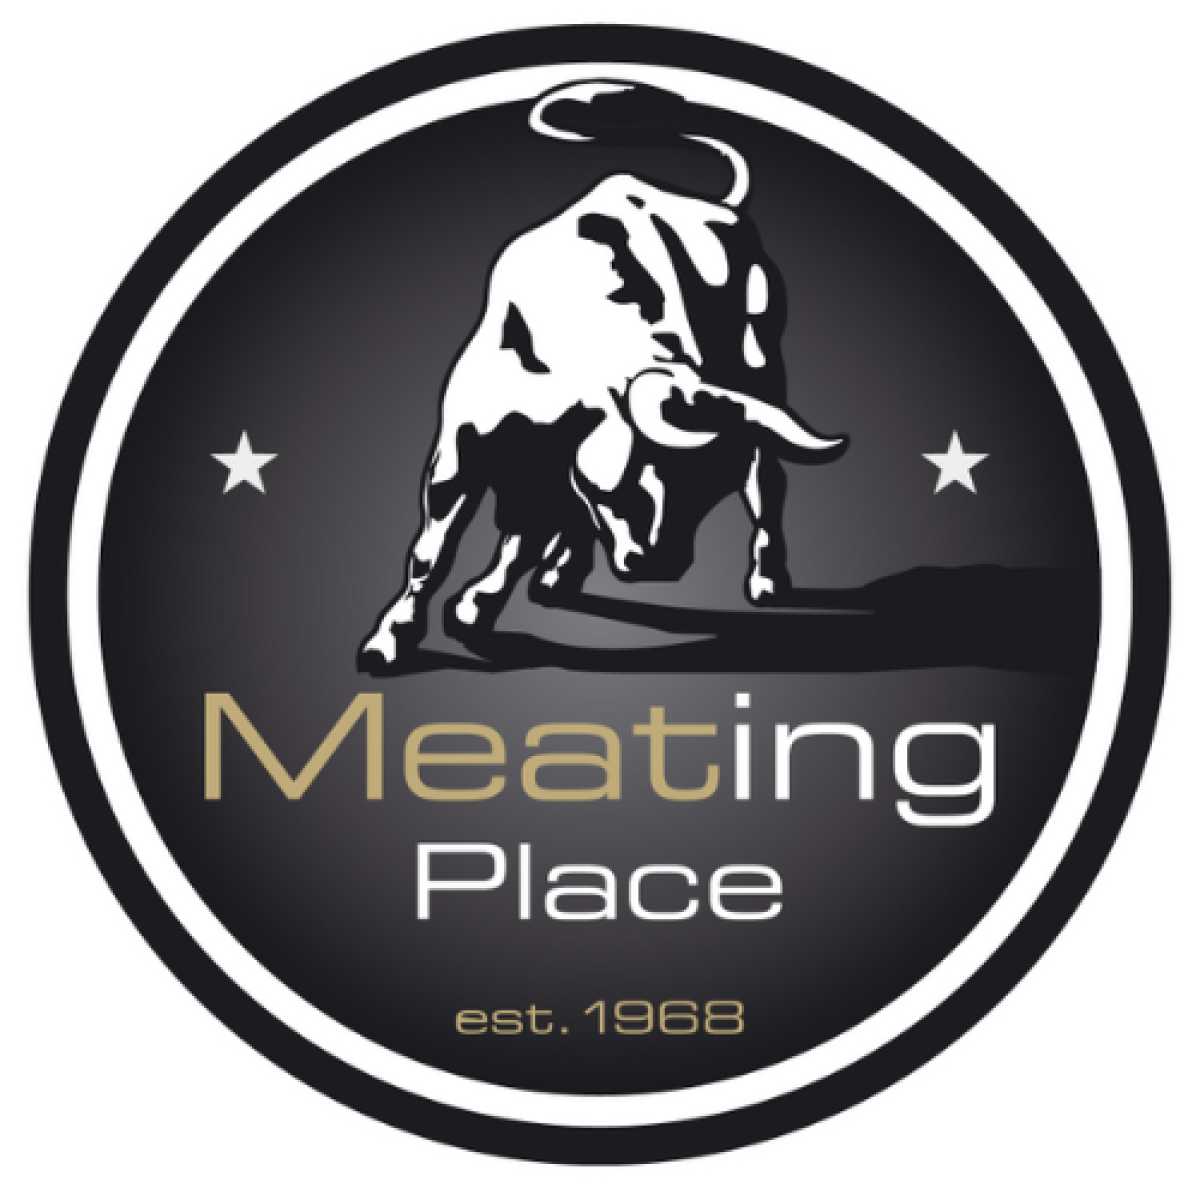 Meating Place Didaskalou